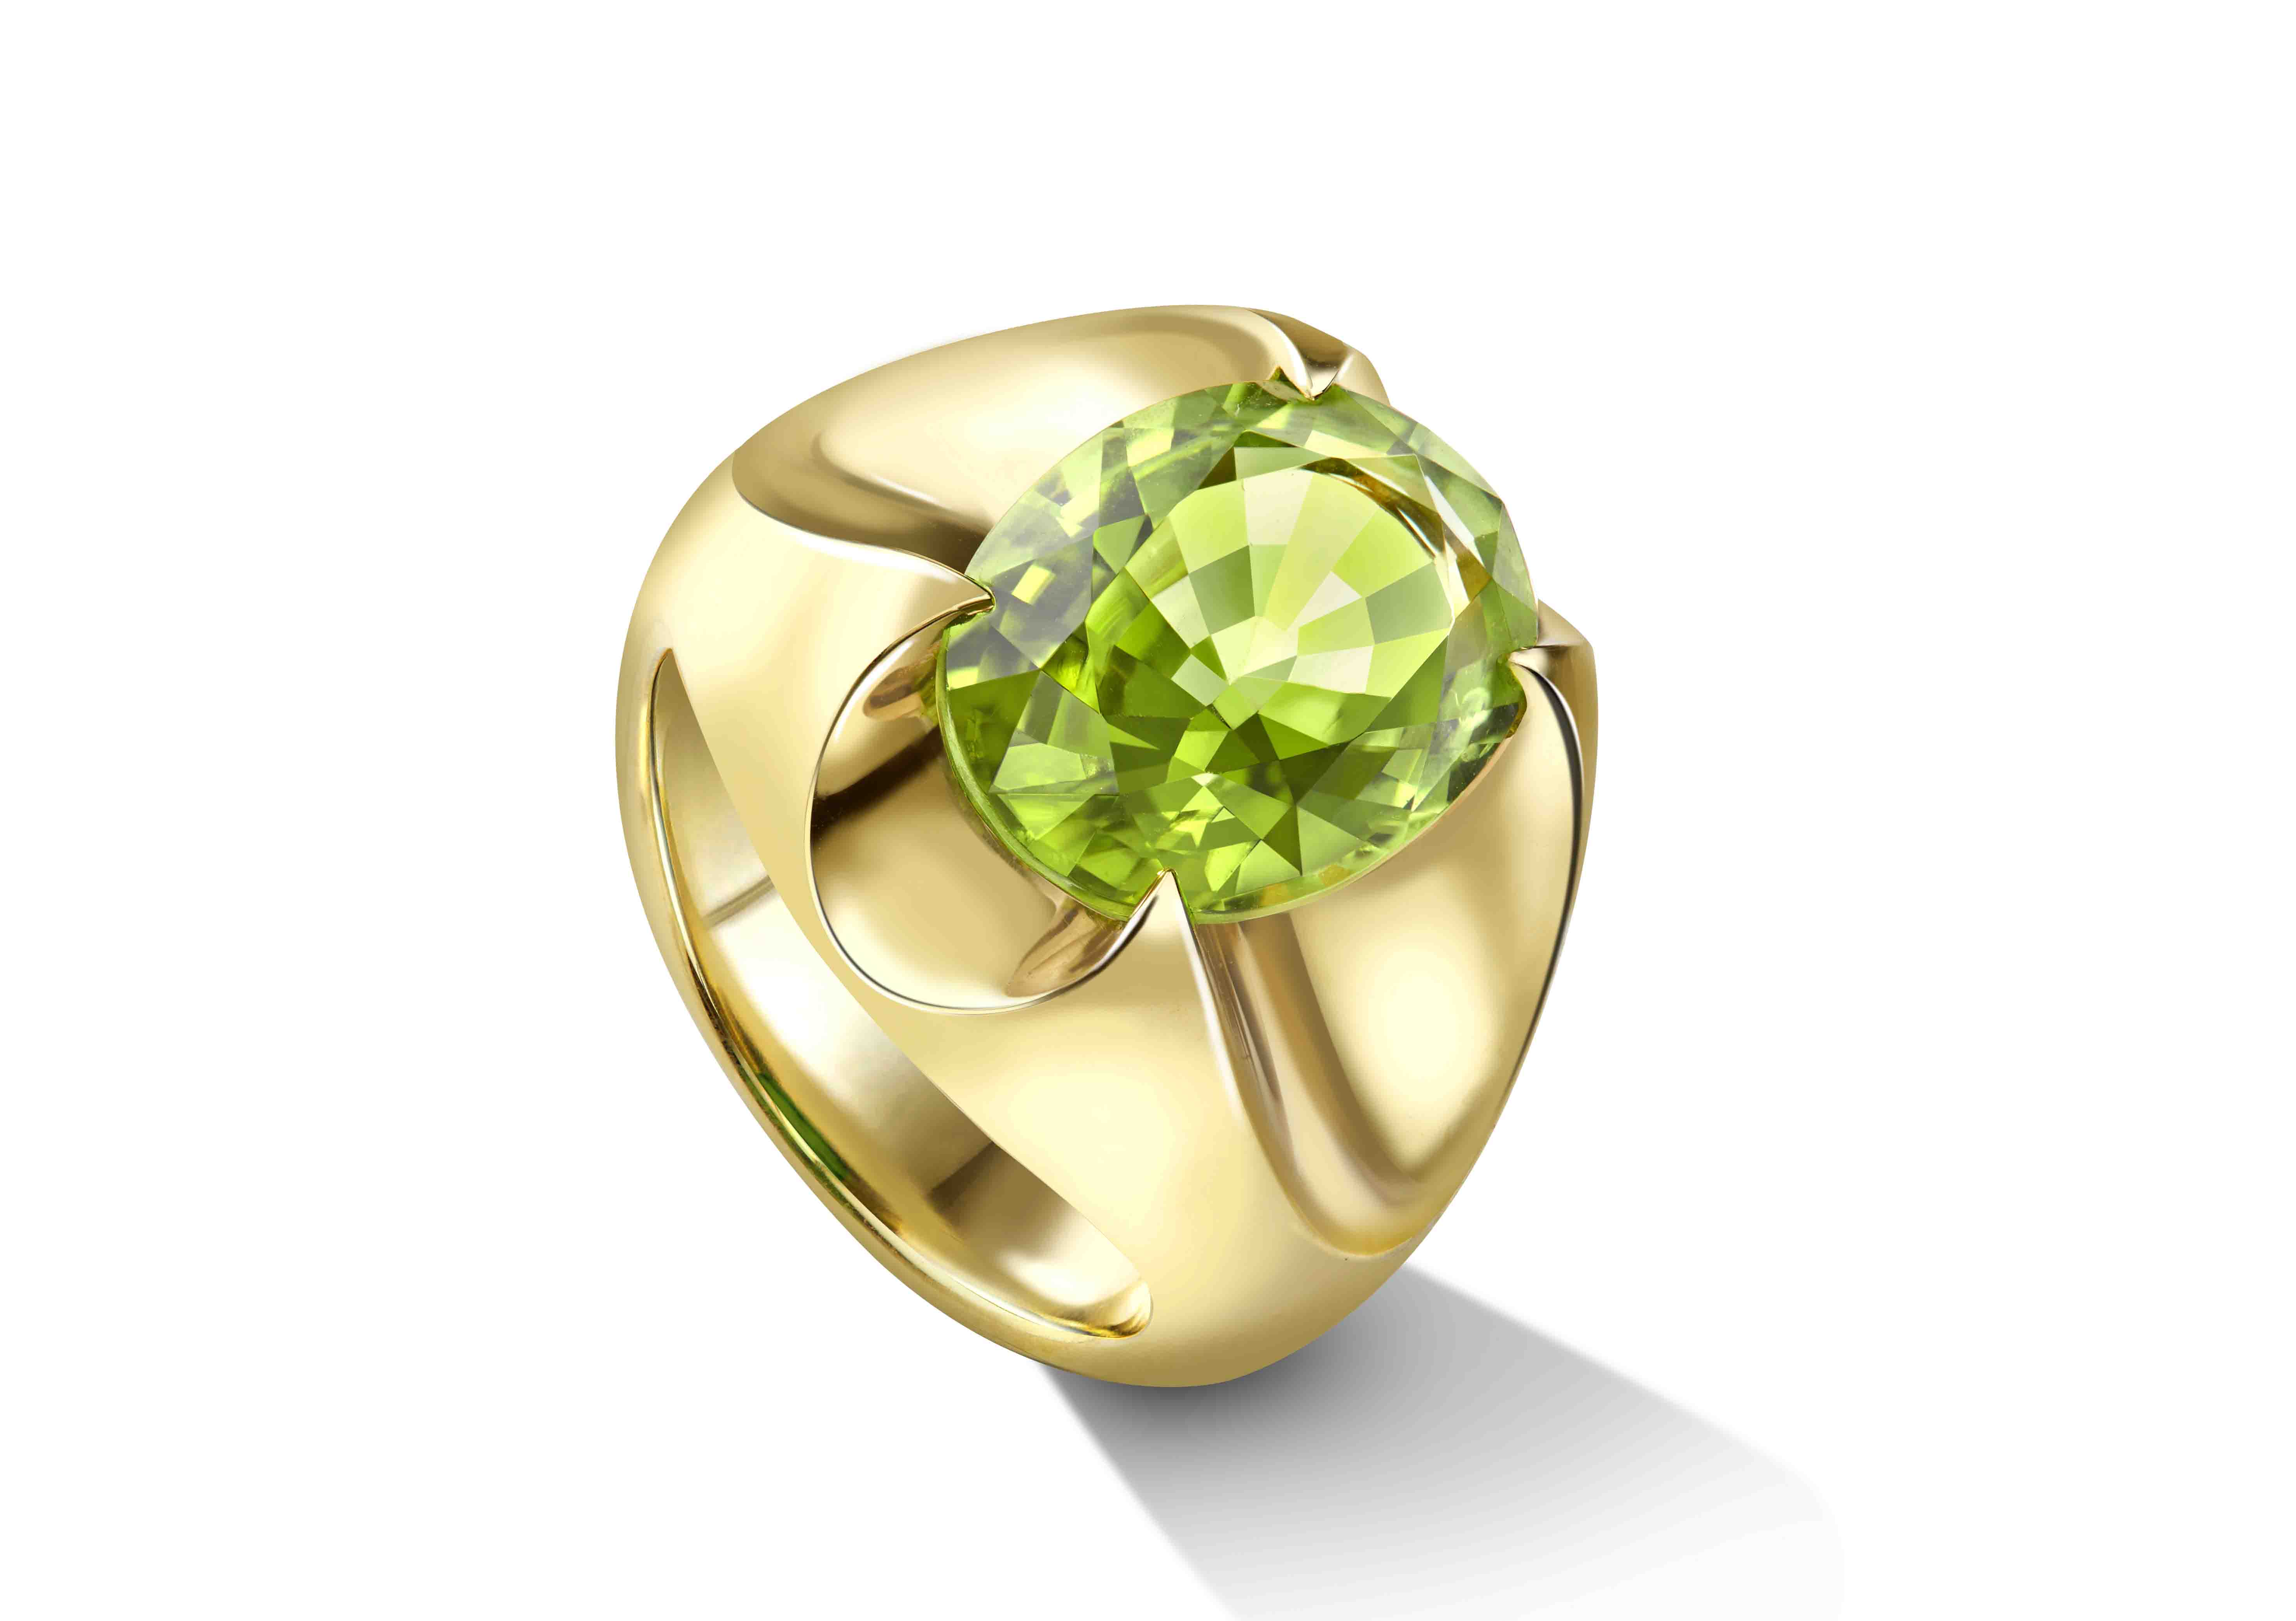 Oval Shape 18k Rose Gold Jewelry Details about   Lovely Green Peridot Gemstone Pendant 1.24 Ct